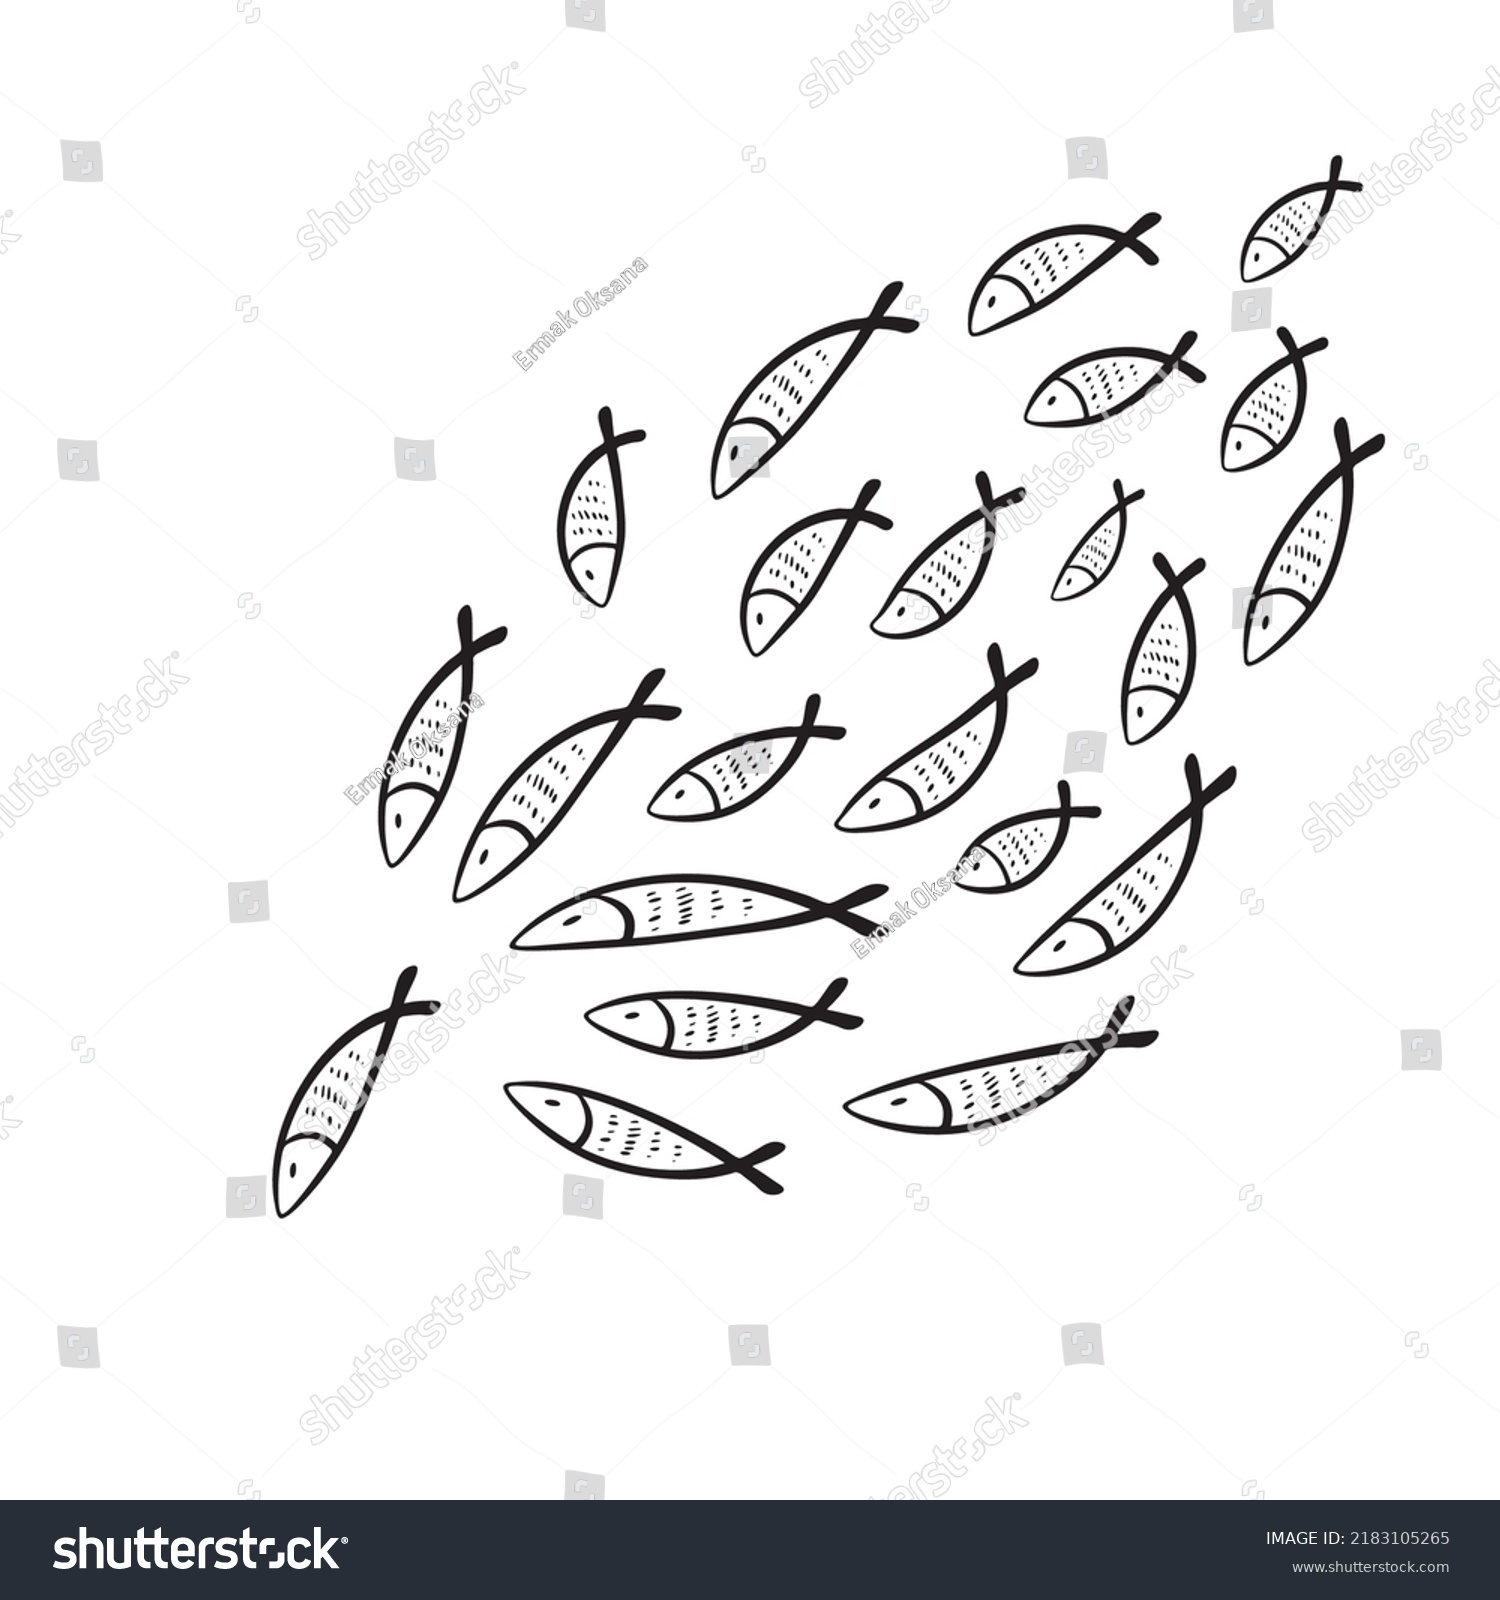 Stock Vector Fish School Hand Drawn Fishes Flock Sketched Fish Group Doodle Drawing Shoal Fishing Vector 2183105265 